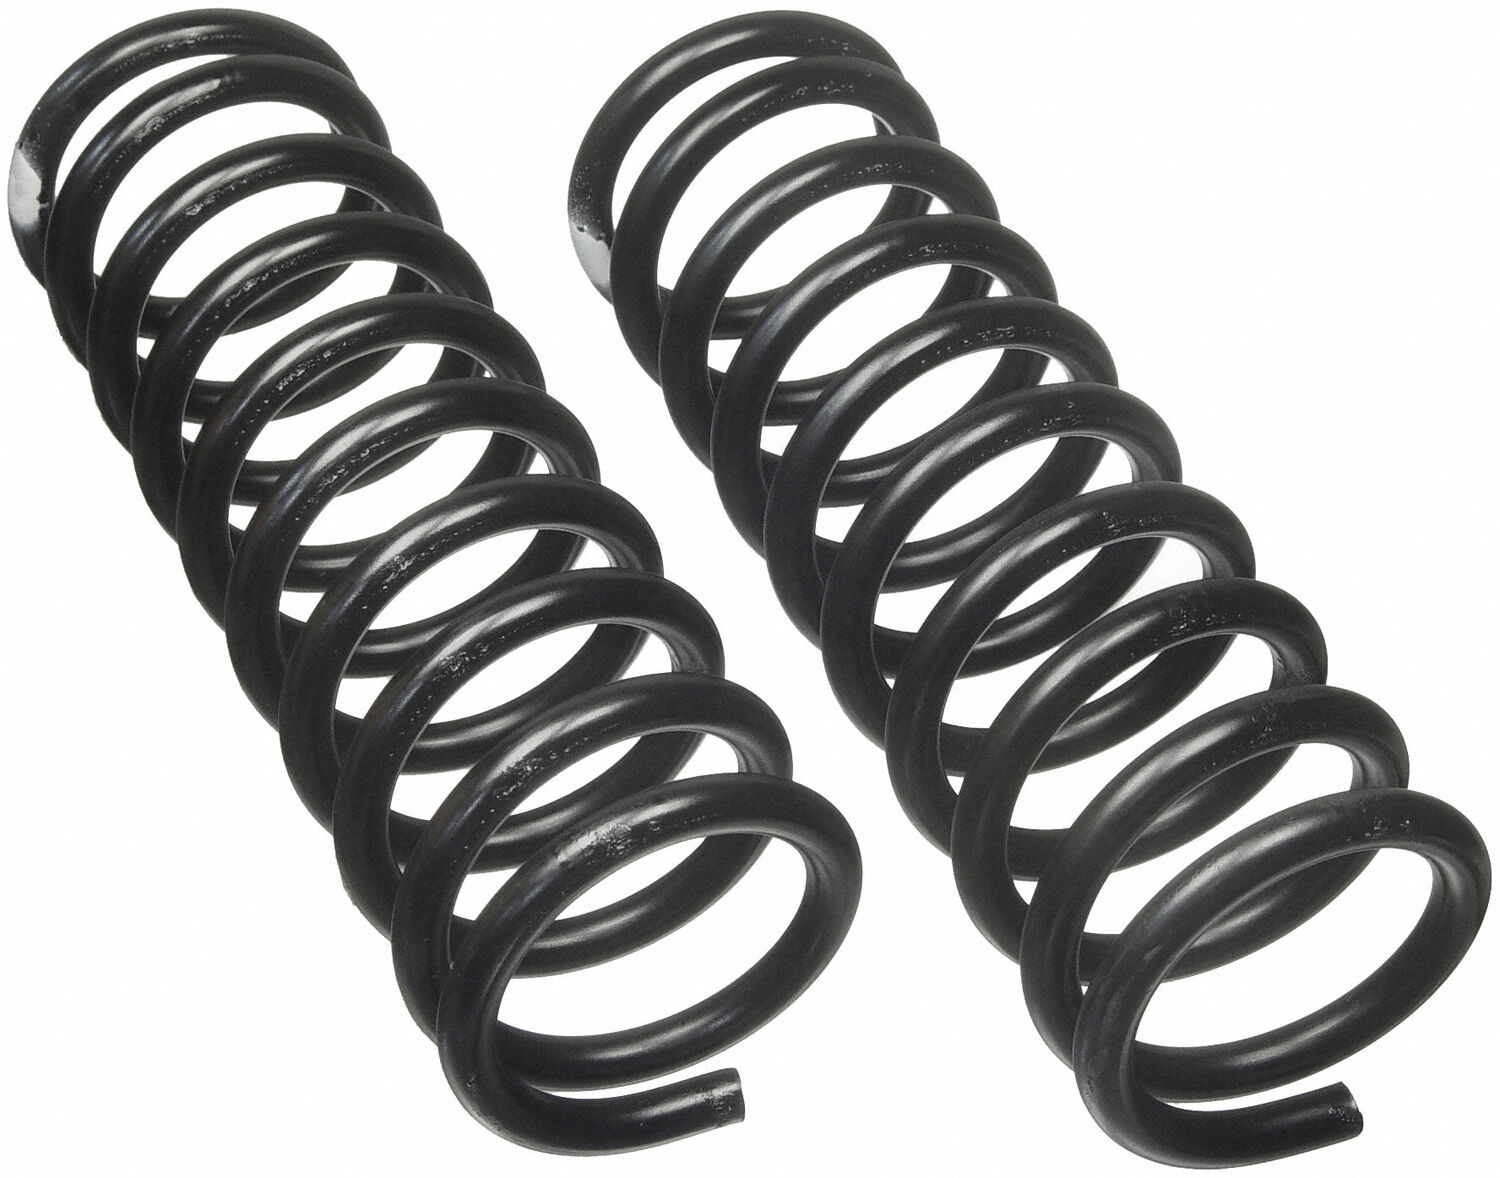 Moog 9114 Coil Spring Set Fits 1987-1989 Lincoln Town Car